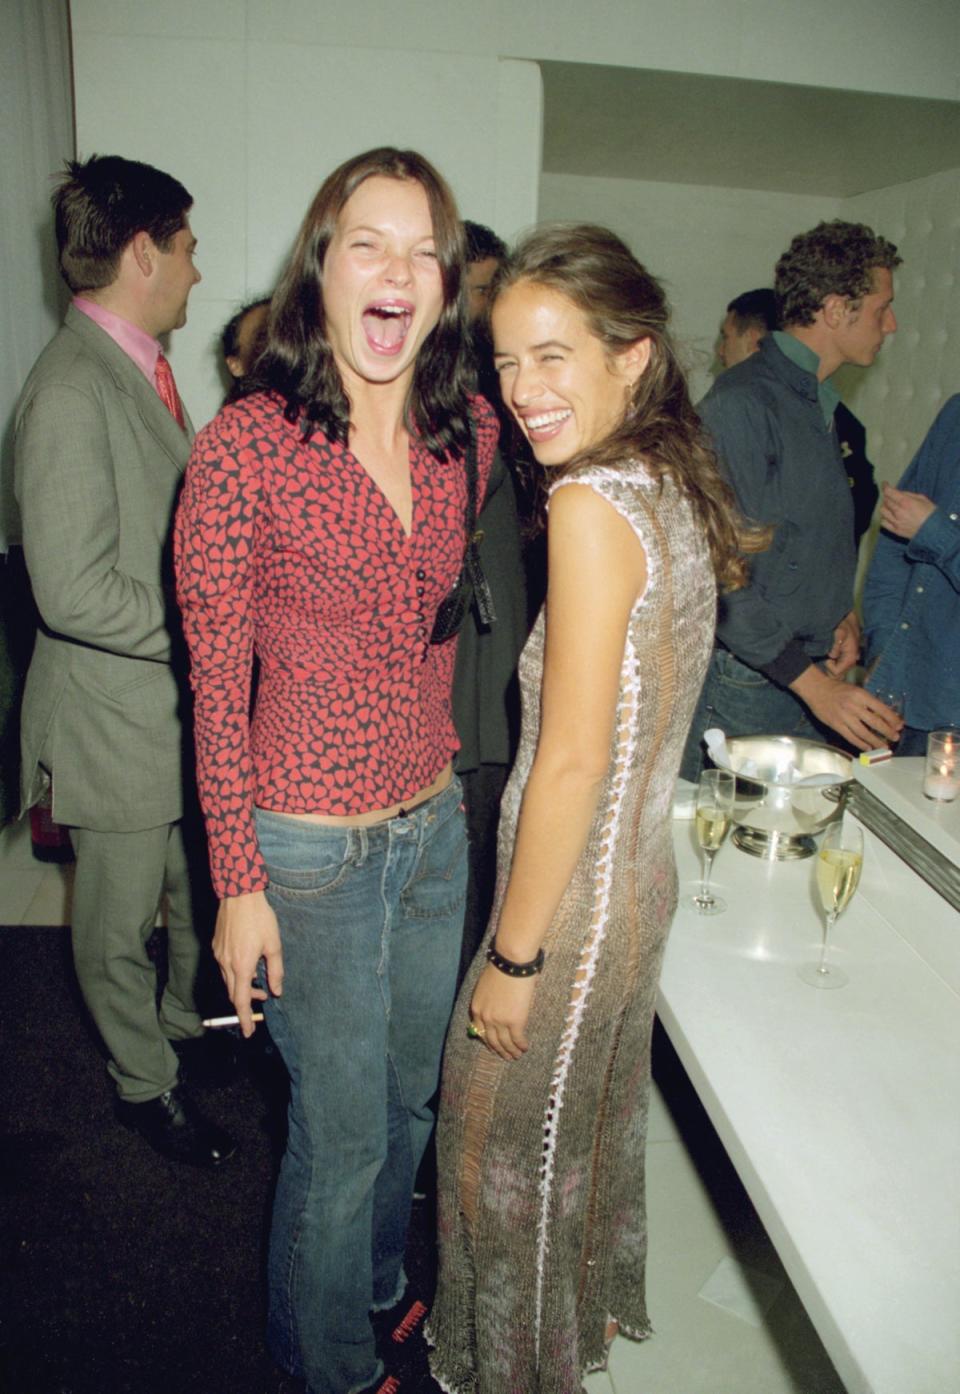 at the launch of Jade Jagger's jewellery range on September 20, 1999 (Getty Images)